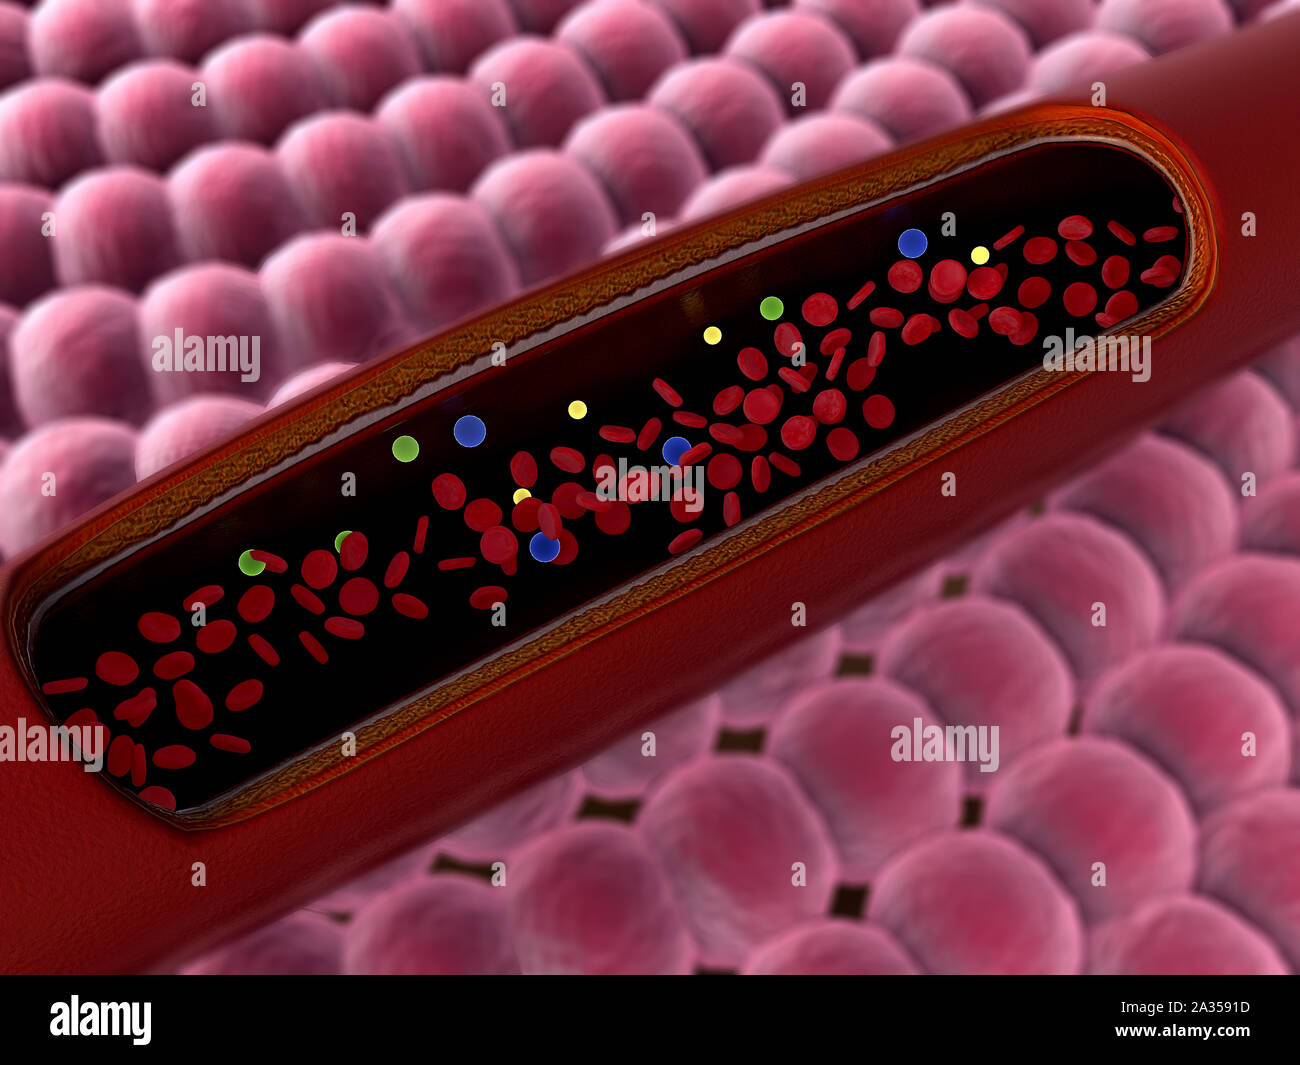 inside the vein, inside the blood vessel, High quality 3d render of blood cells, Animation of Red Blood Cells Flowing Through Vein Stock Photo